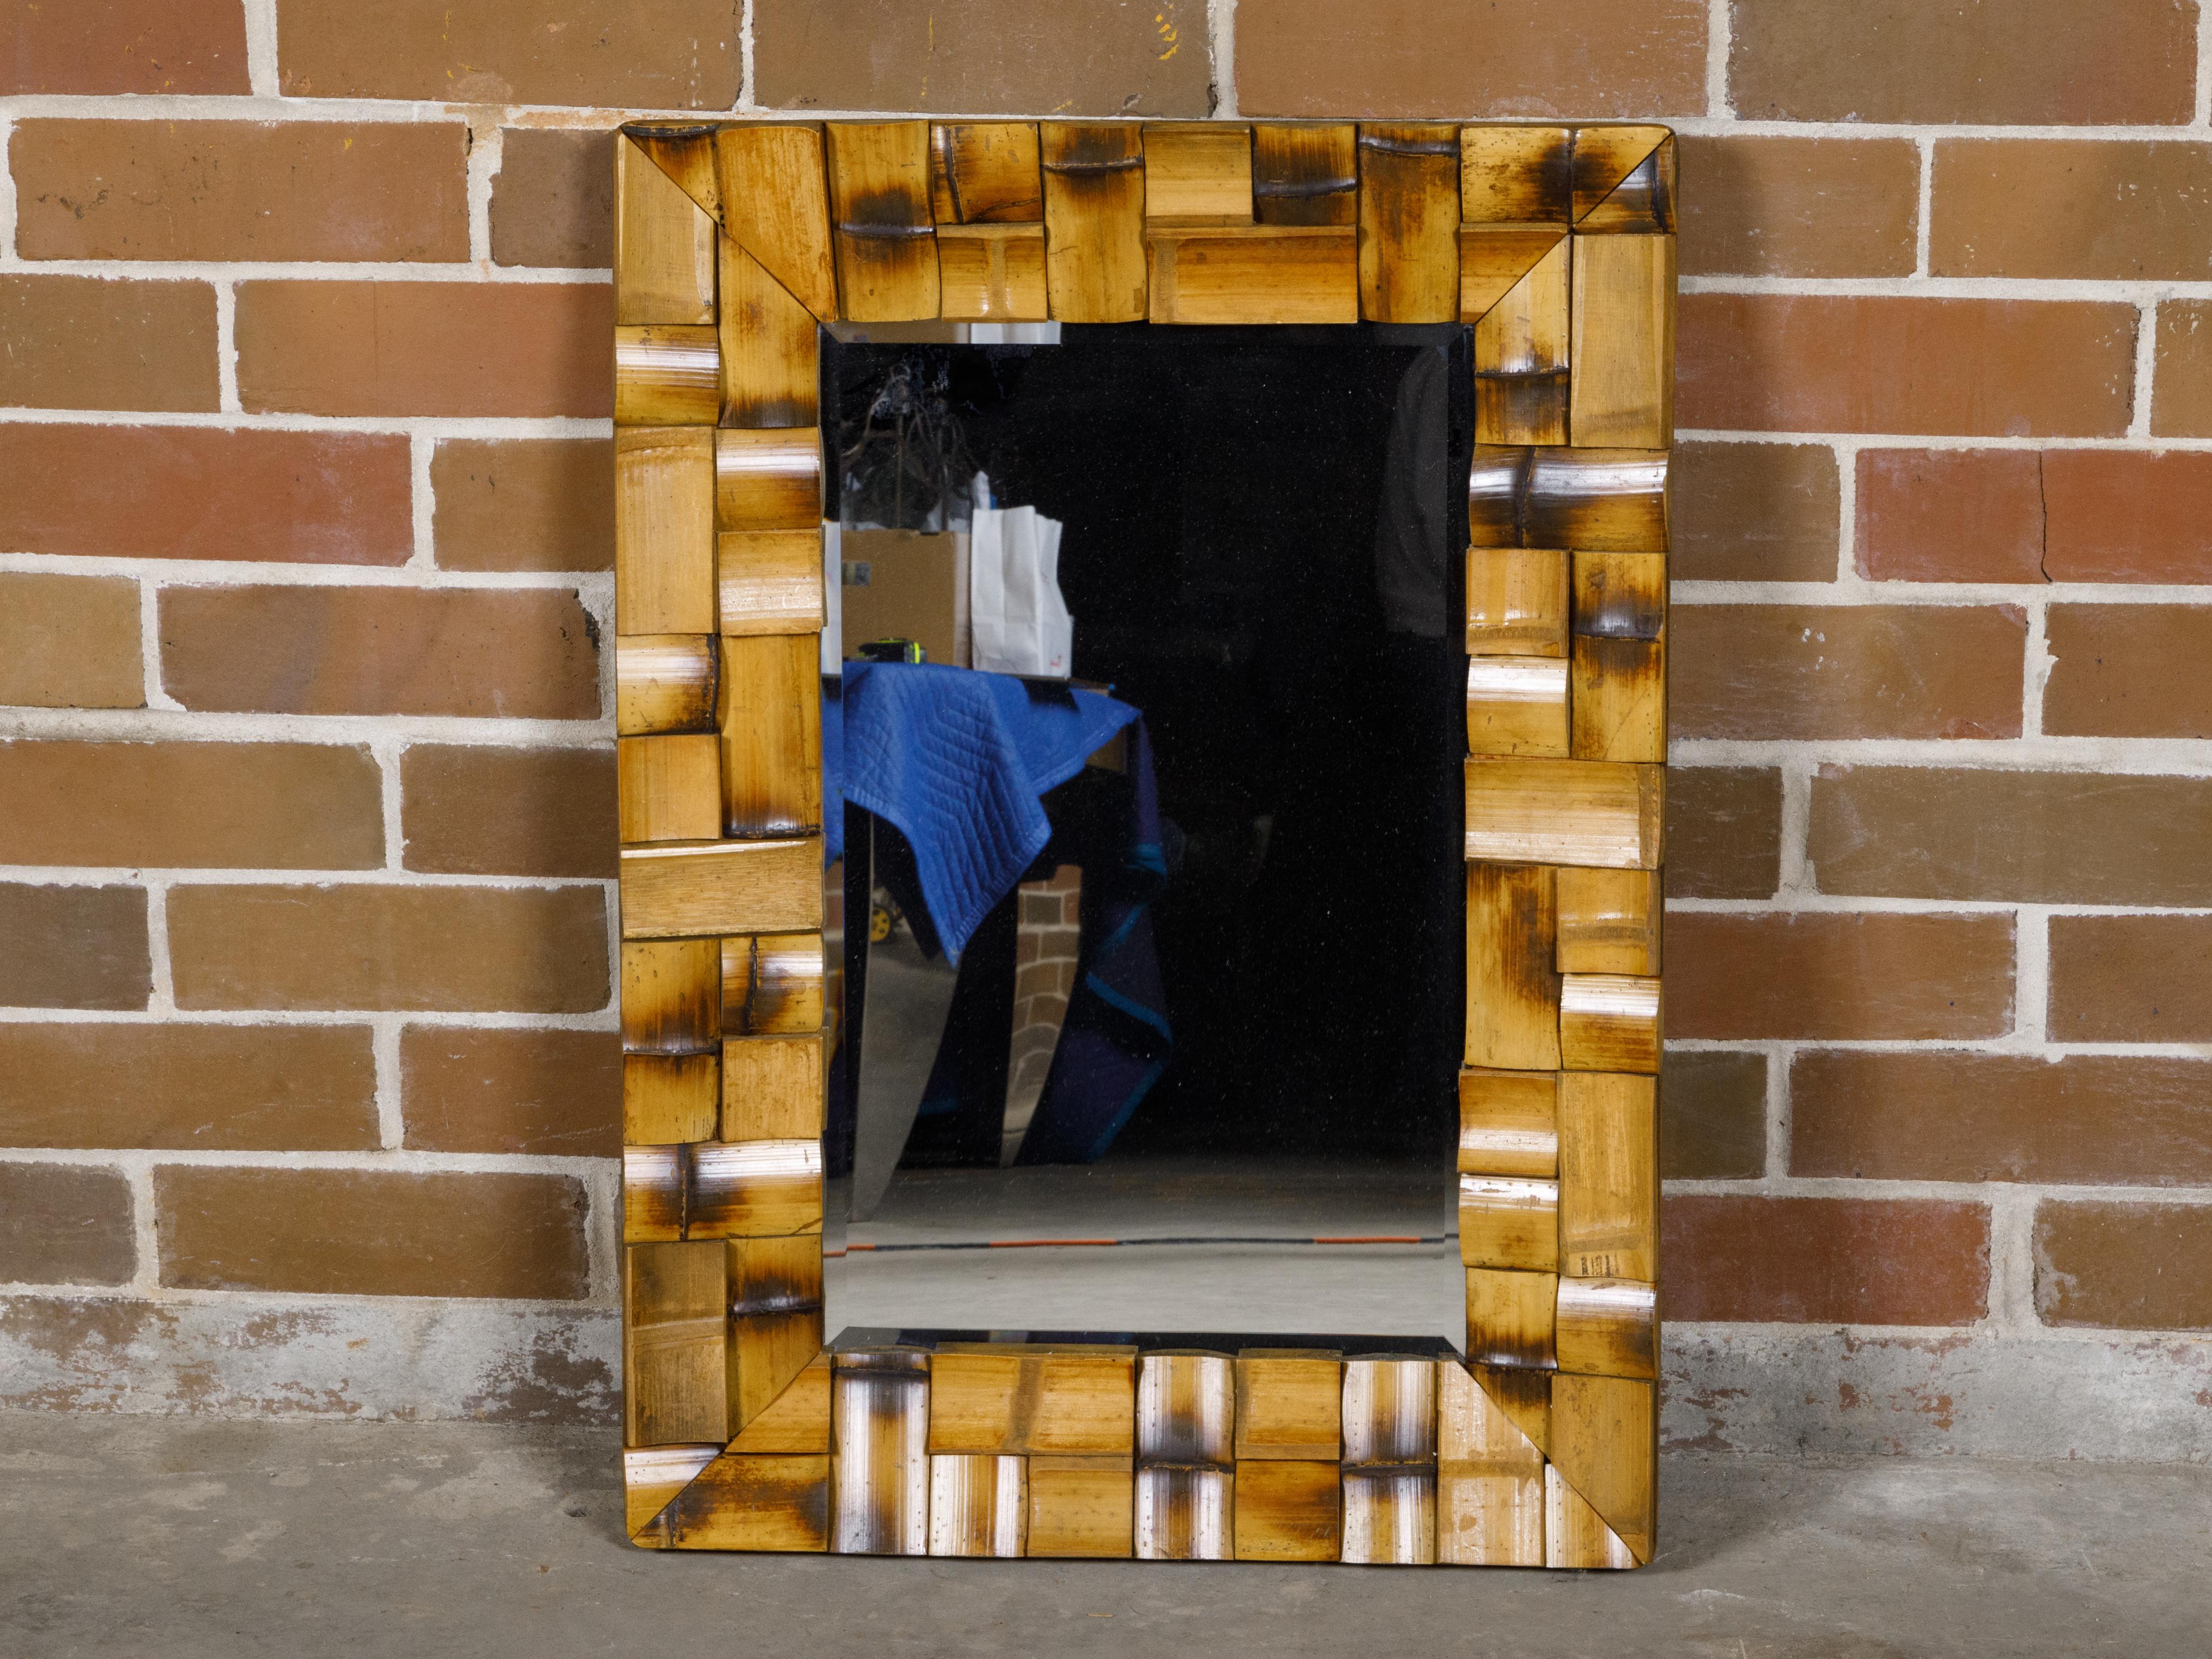 A French Midcentury bamboo mirror with geometric mosaic style arrangement. This French Midcentury wall mirror, featuring bamboo organized in a unique mosaic style arrangement, is a striking example of mid-20th-century design. The bamboo segments are